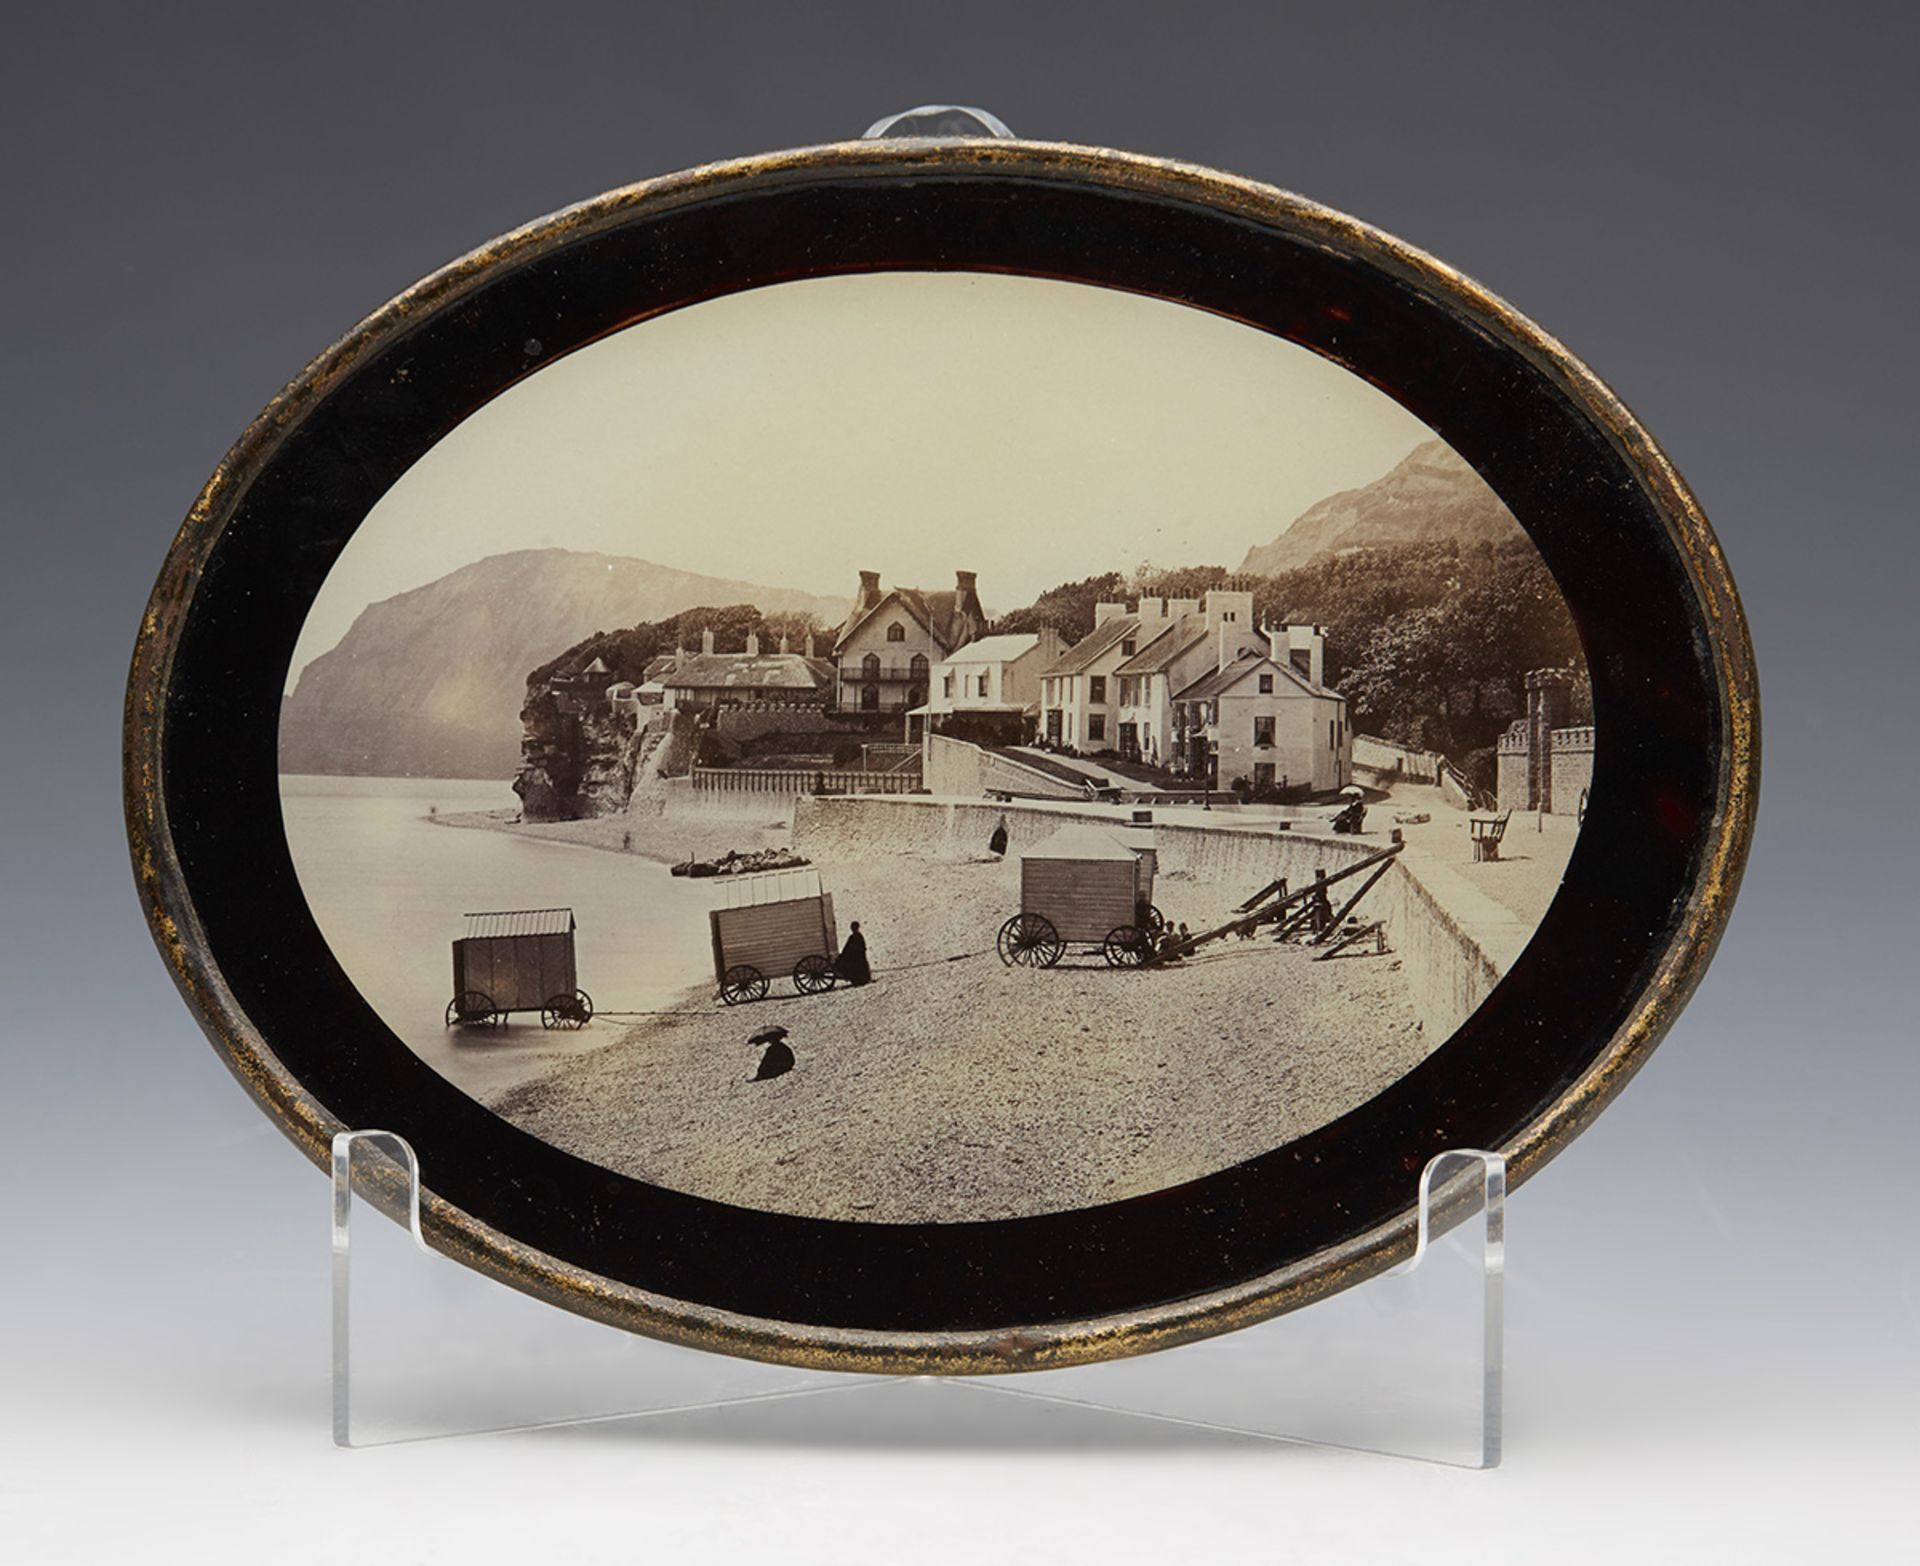 ANTIQUE FRAMED PHOTOGRAPH OF A COSATAL SCENE 19TH C.   DIMENSIONS   Height 14,5cm, Length 18,5cm